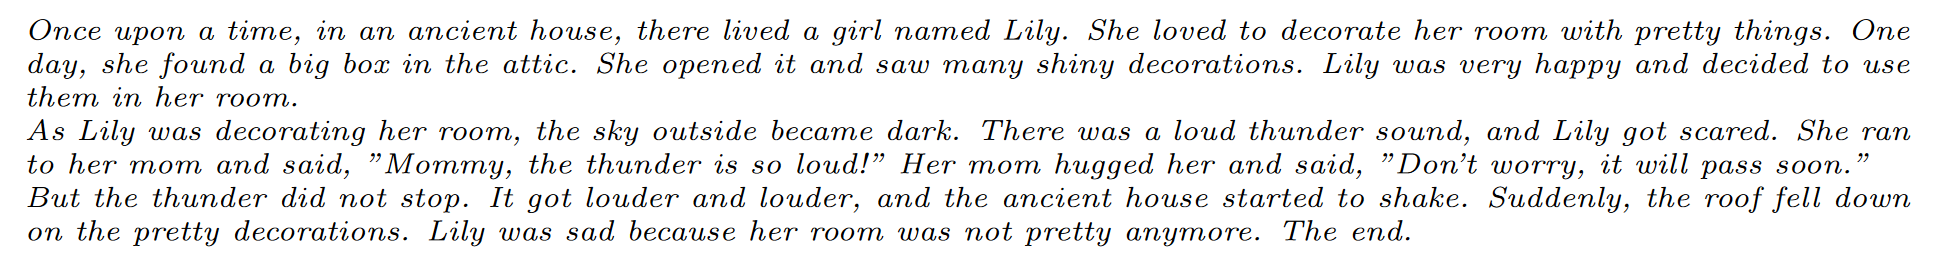 Example story from the TinyStories Dataset.